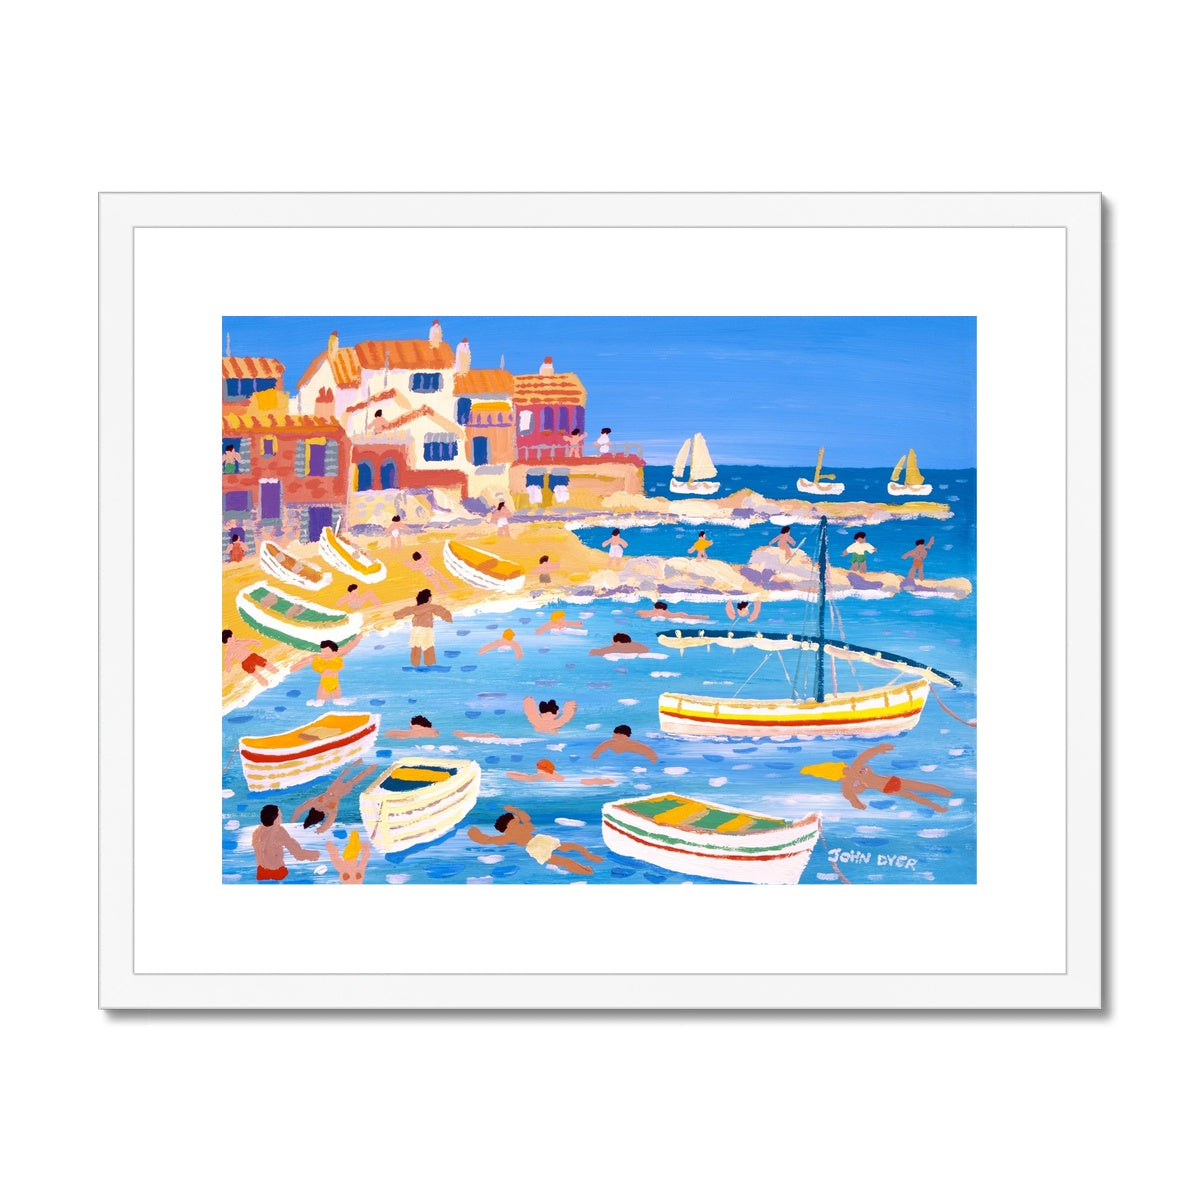 John Dyer Framed Open Edition Cornish Fine Art Print. 'White Washed Buildings on the Beach, Calella, Spain'. Cornwall Art Gallery